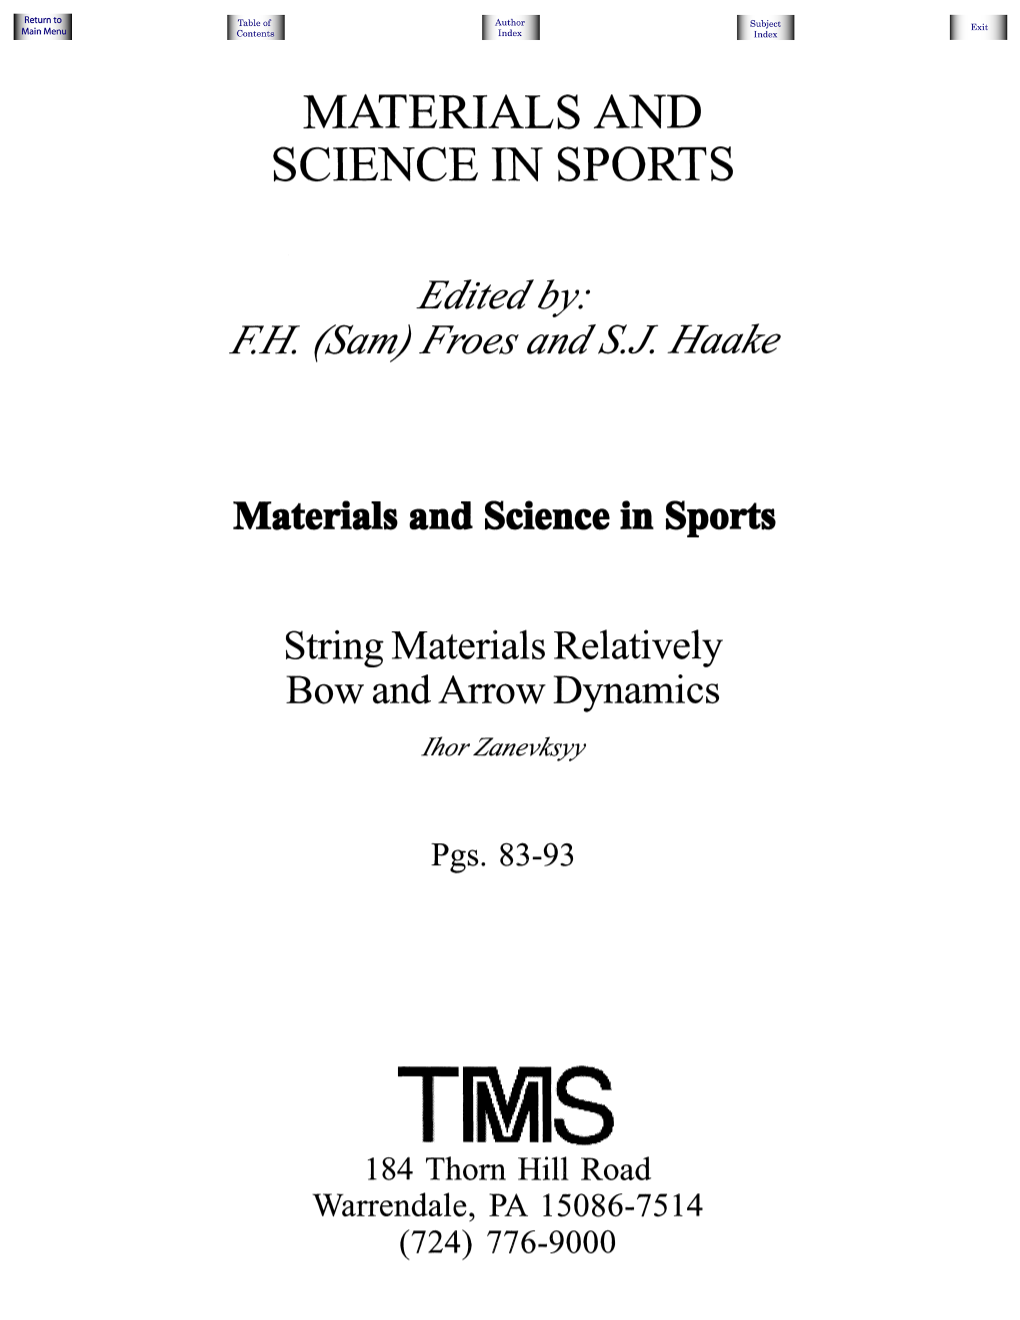 String Materials Relatively Bow and Arrow Dynamics